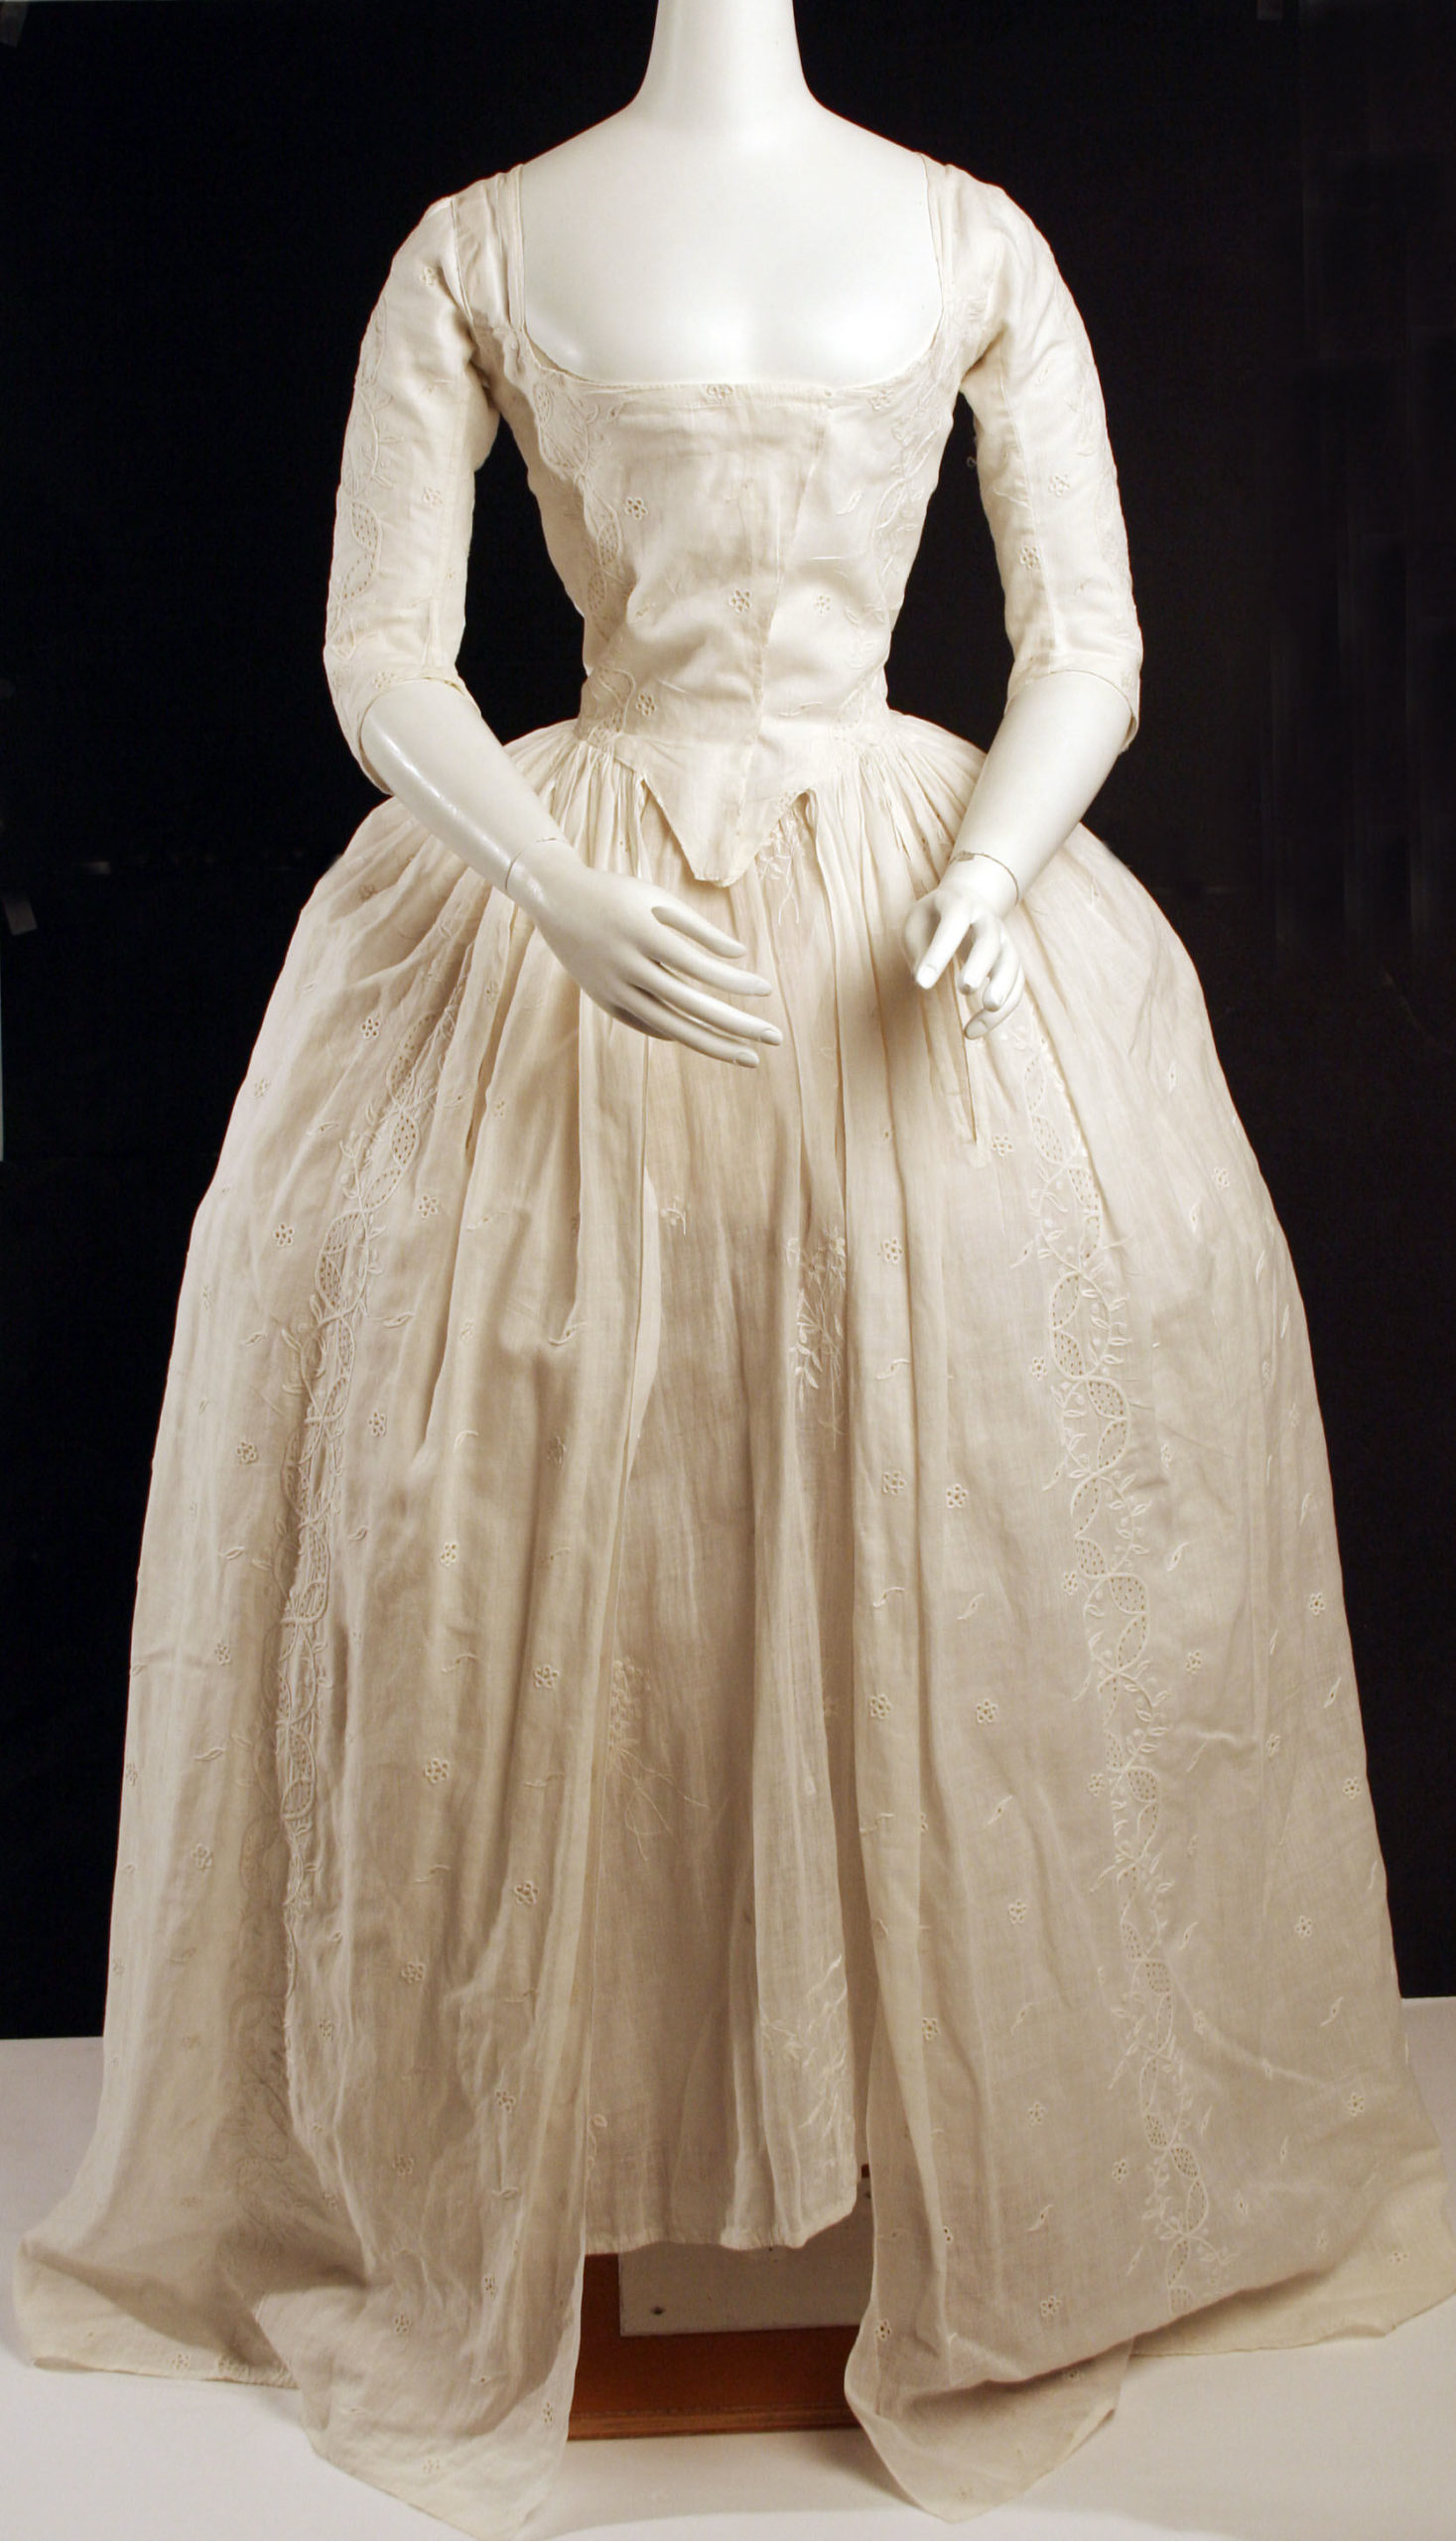 Robe à l'Anglaise, ca. 1780, British, cotton, flax, Gifts in memory of Elizabeth Lawrence, 1982, Metropolitan Museum of Art, 1982.291a, b 2